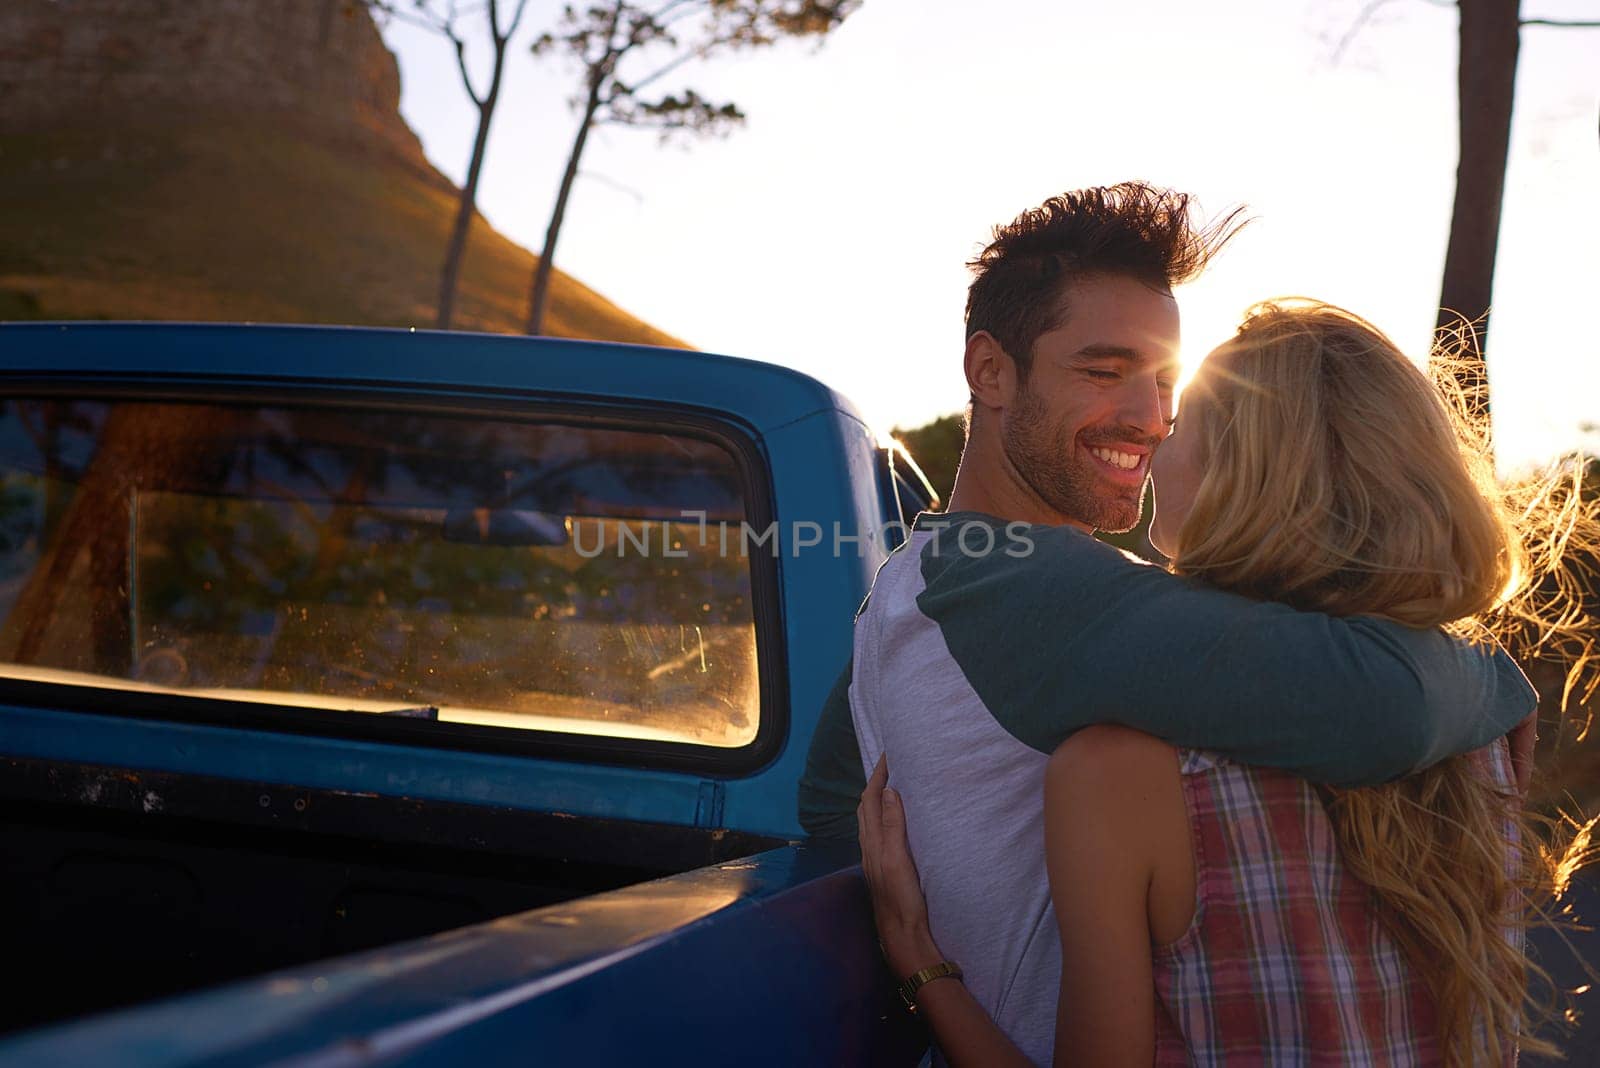 Hugging, car or happy couple on road trip in nature on romantic, holiday or vacation for bonding on date. Truck, travel or people hug or embrace on summer weekend trip with romance in park together.